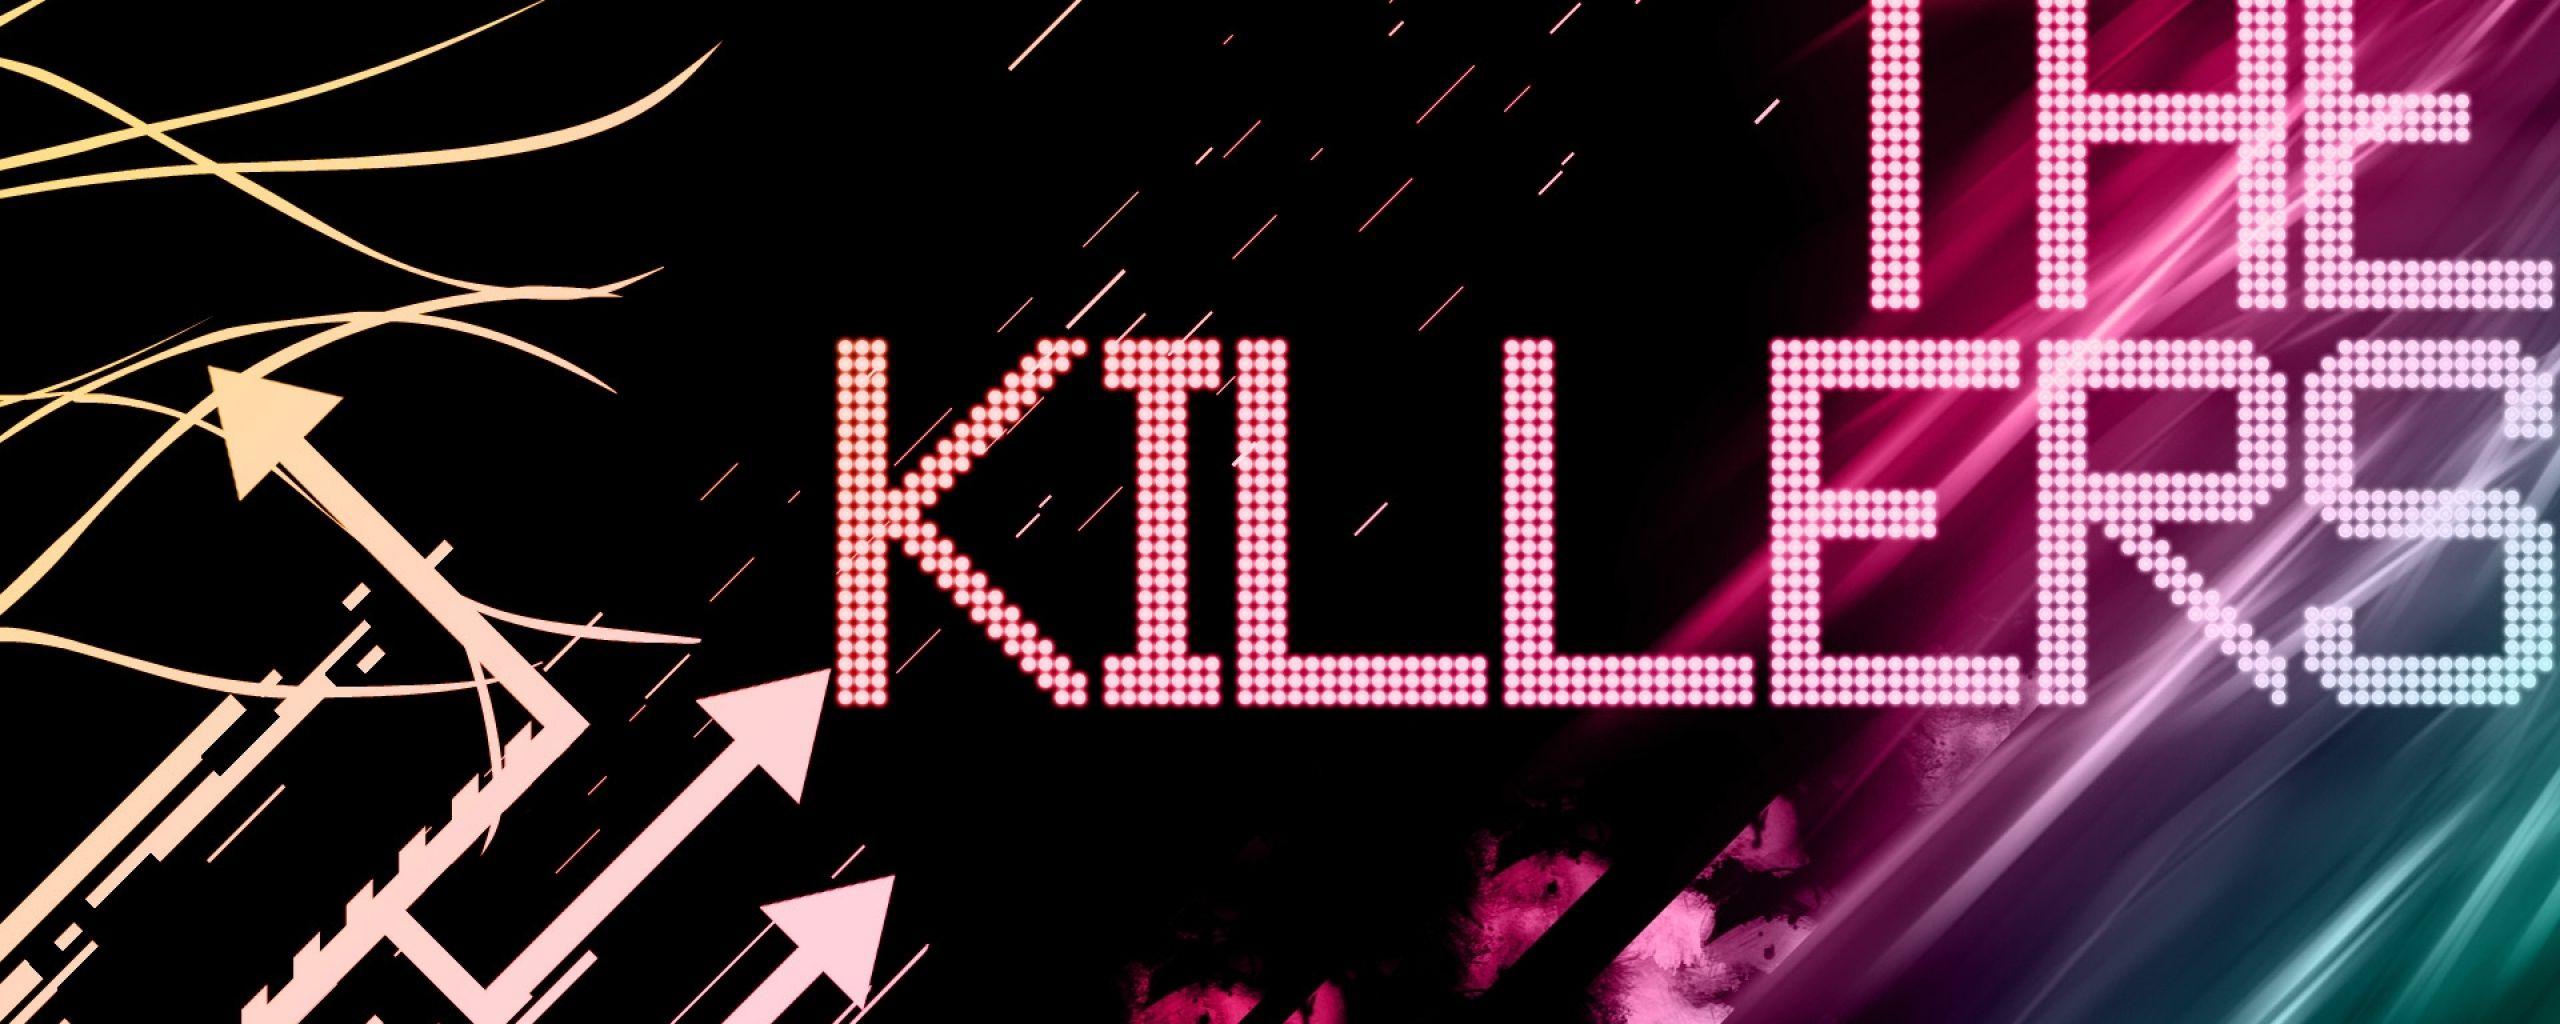 Download Wallpaper 2560x1024 The killers, Name, Graphics, Arrows